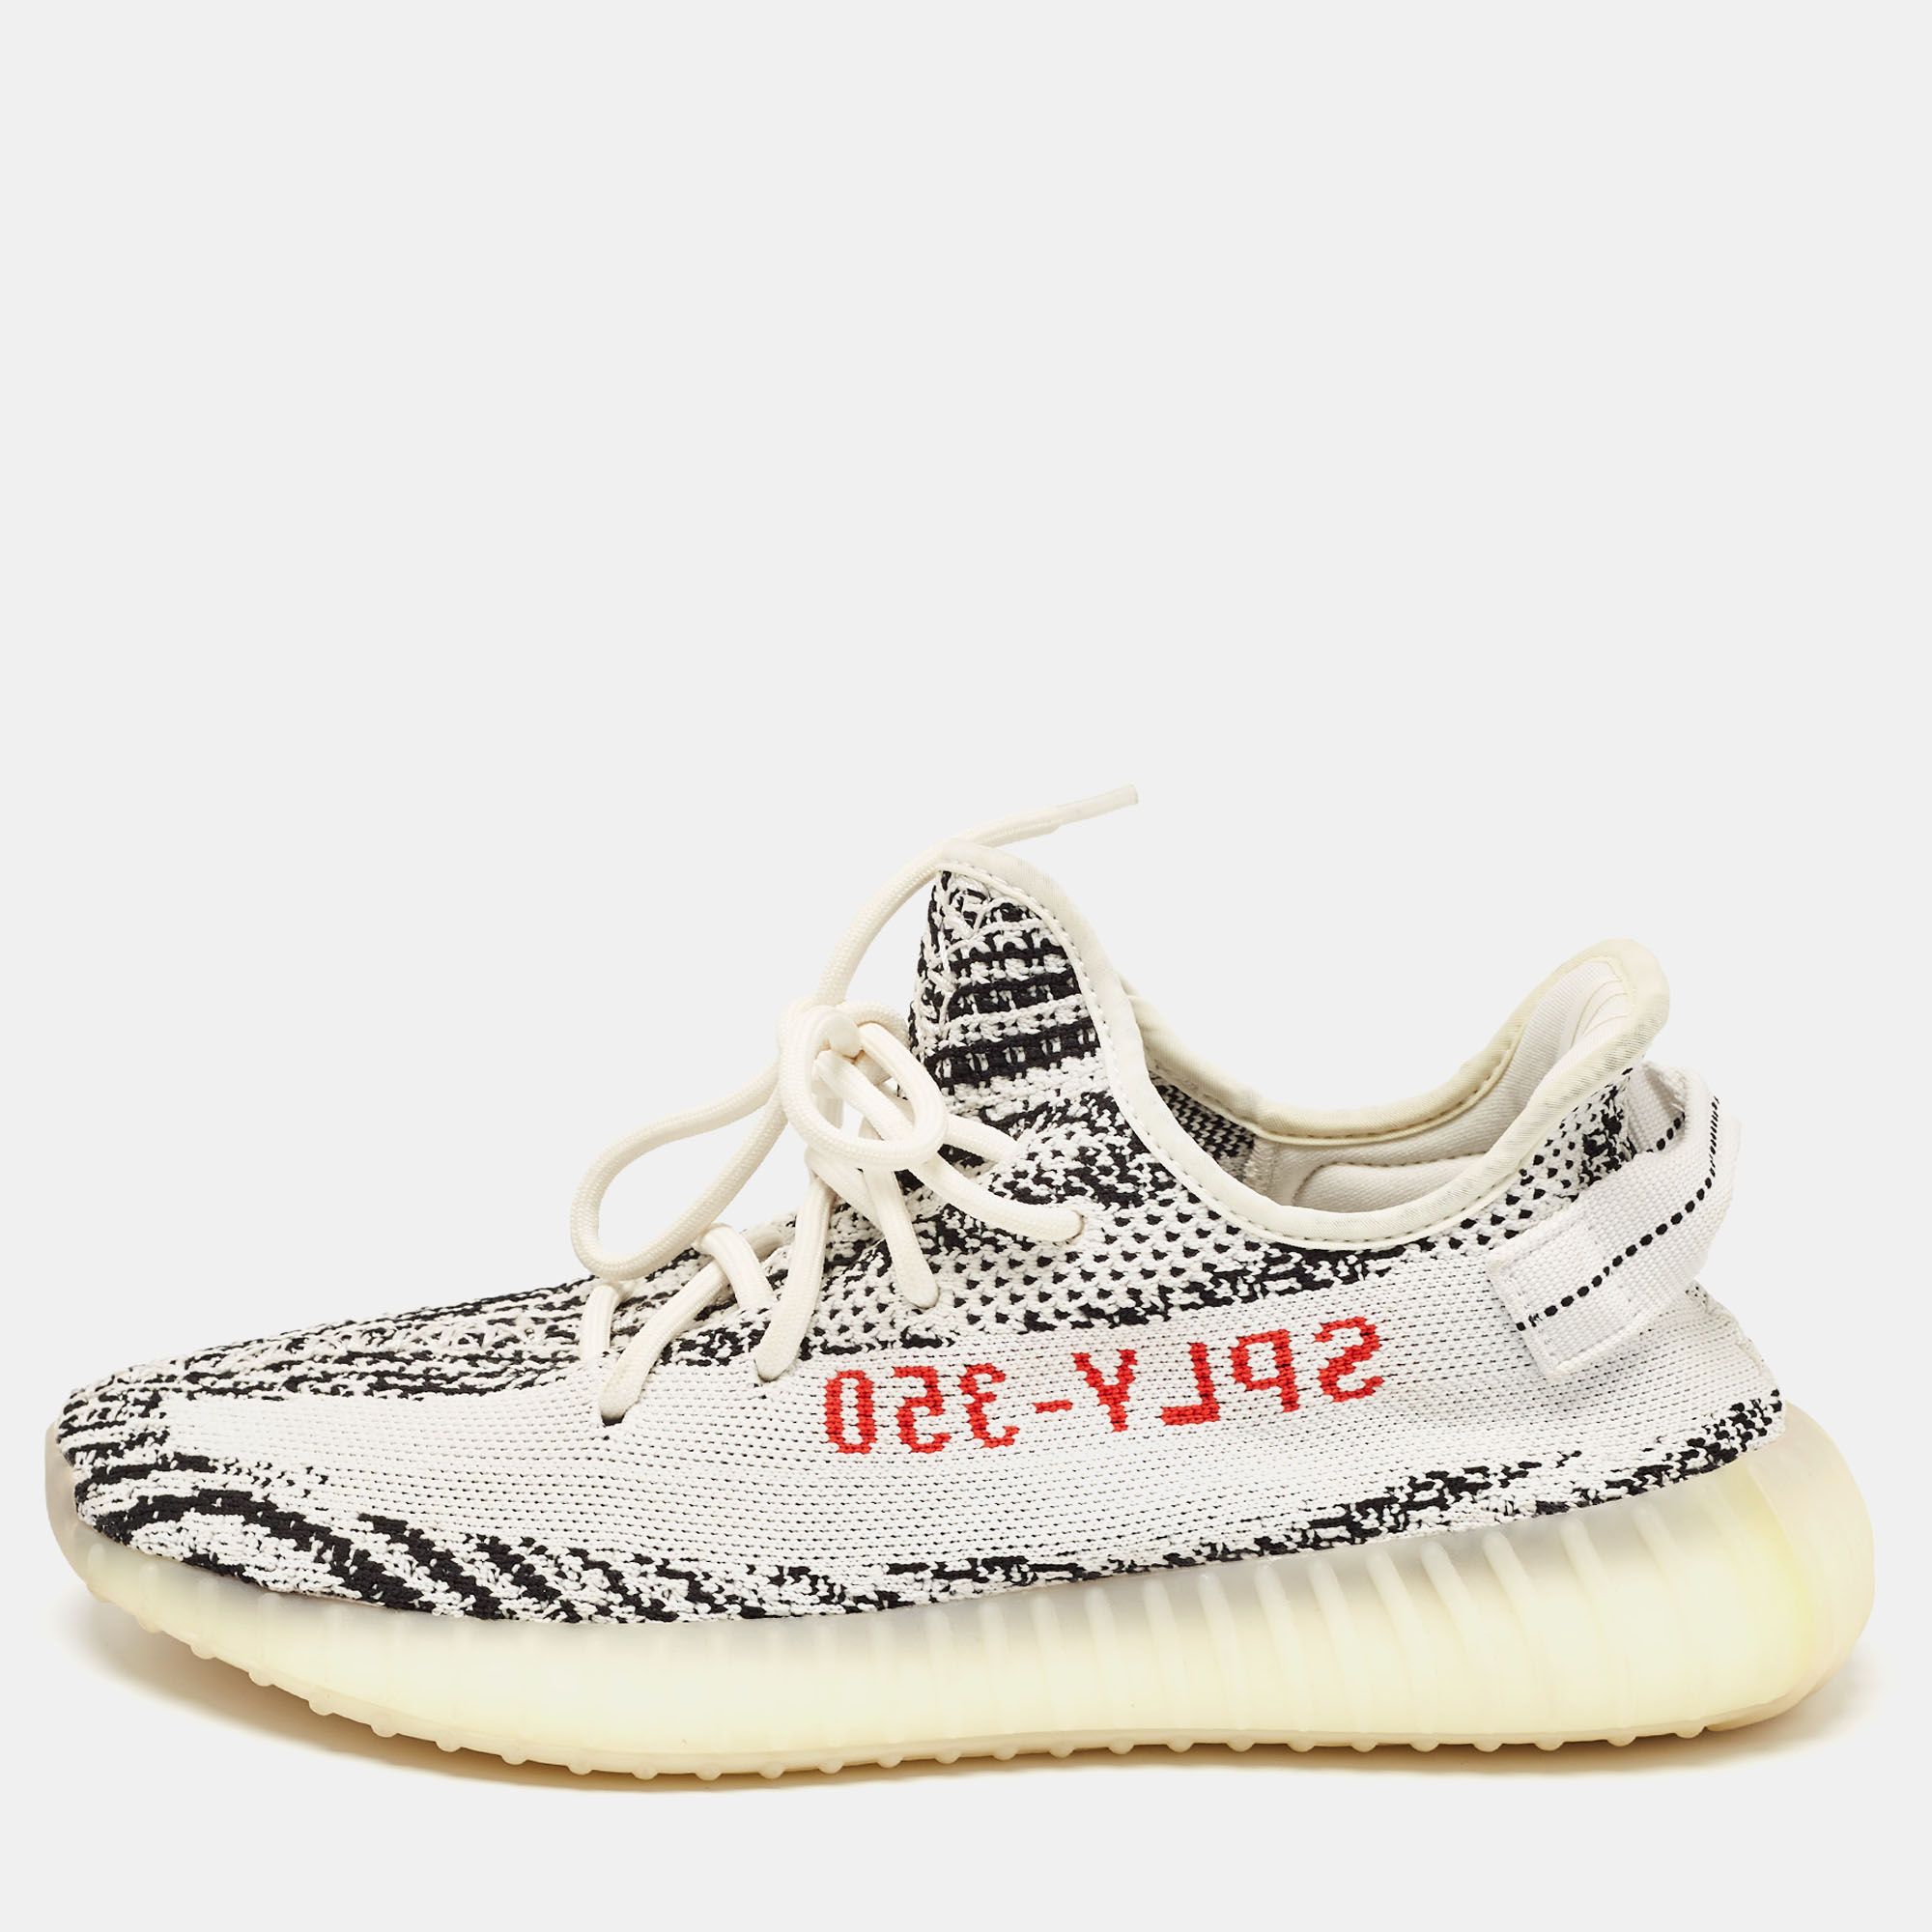 Pre-owned Yeezy X Adidas White/black Knit Fabric Boost 350 V2 Zebra Trainers Size 43 1/3